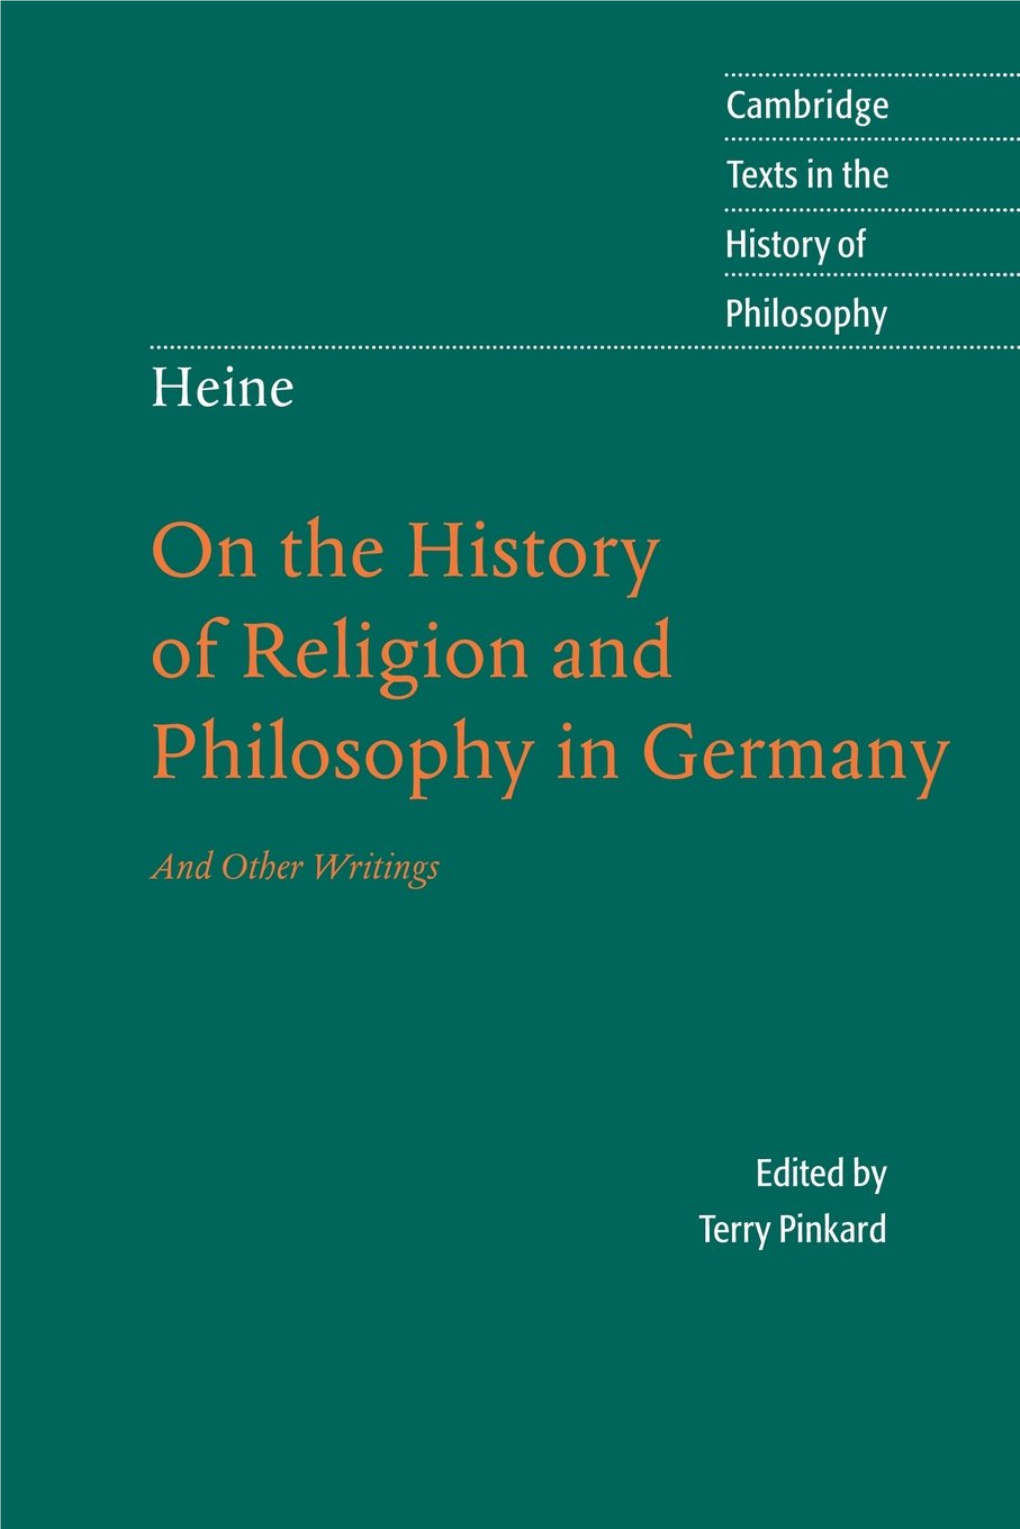 On the History of Religion and Philosophy in Germany & Other Writings